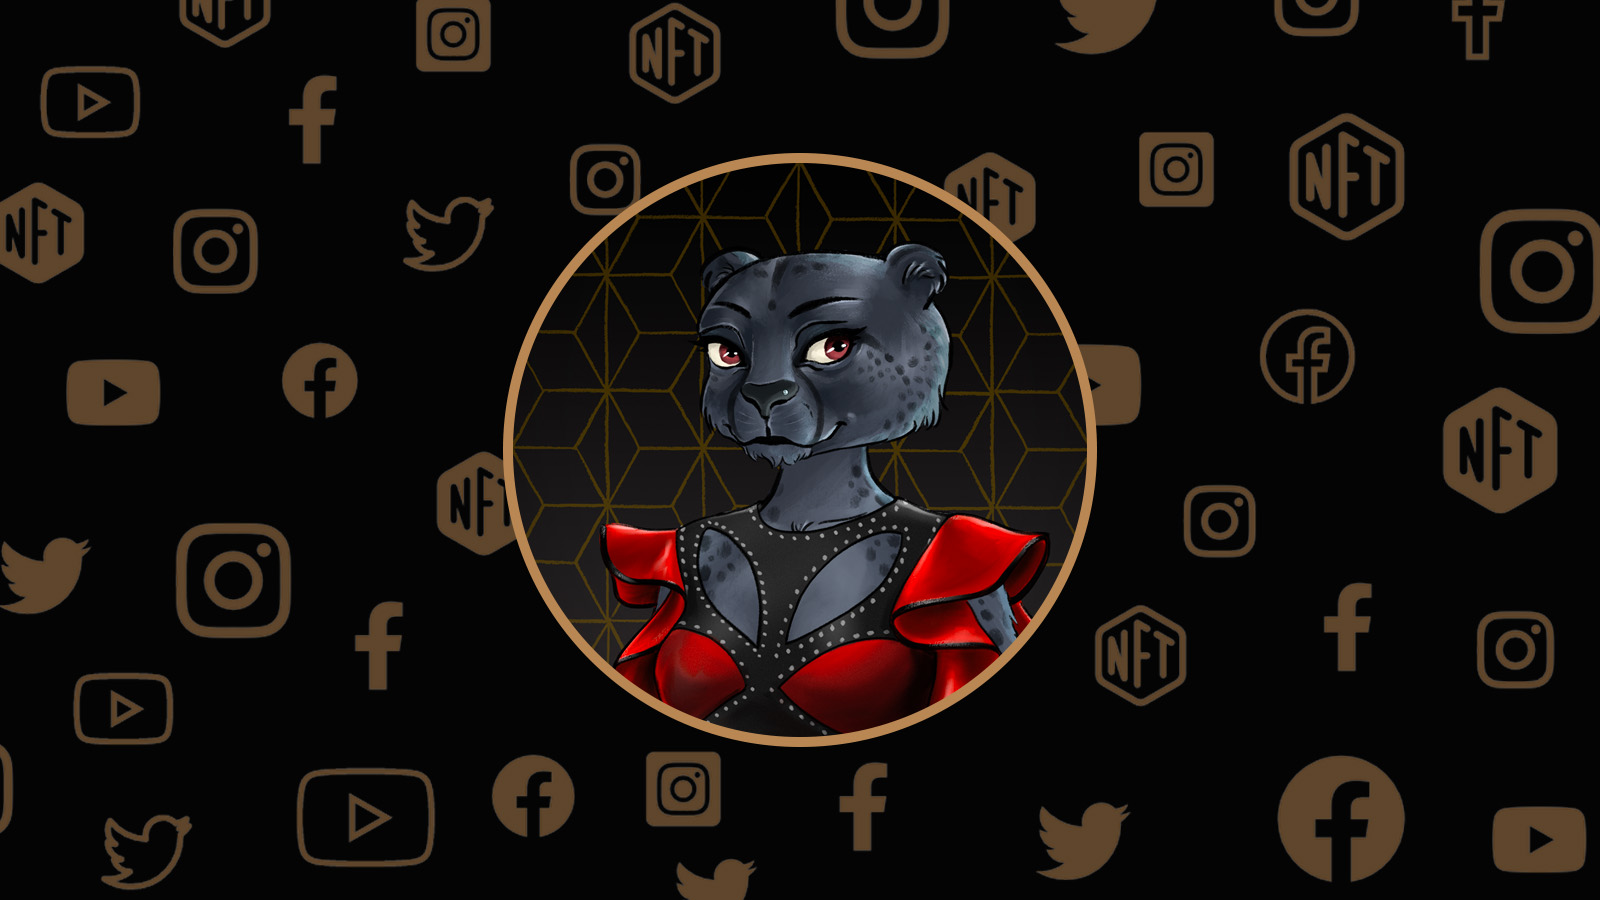 Image of a 1687 Club token surrounded by social media platform icons.